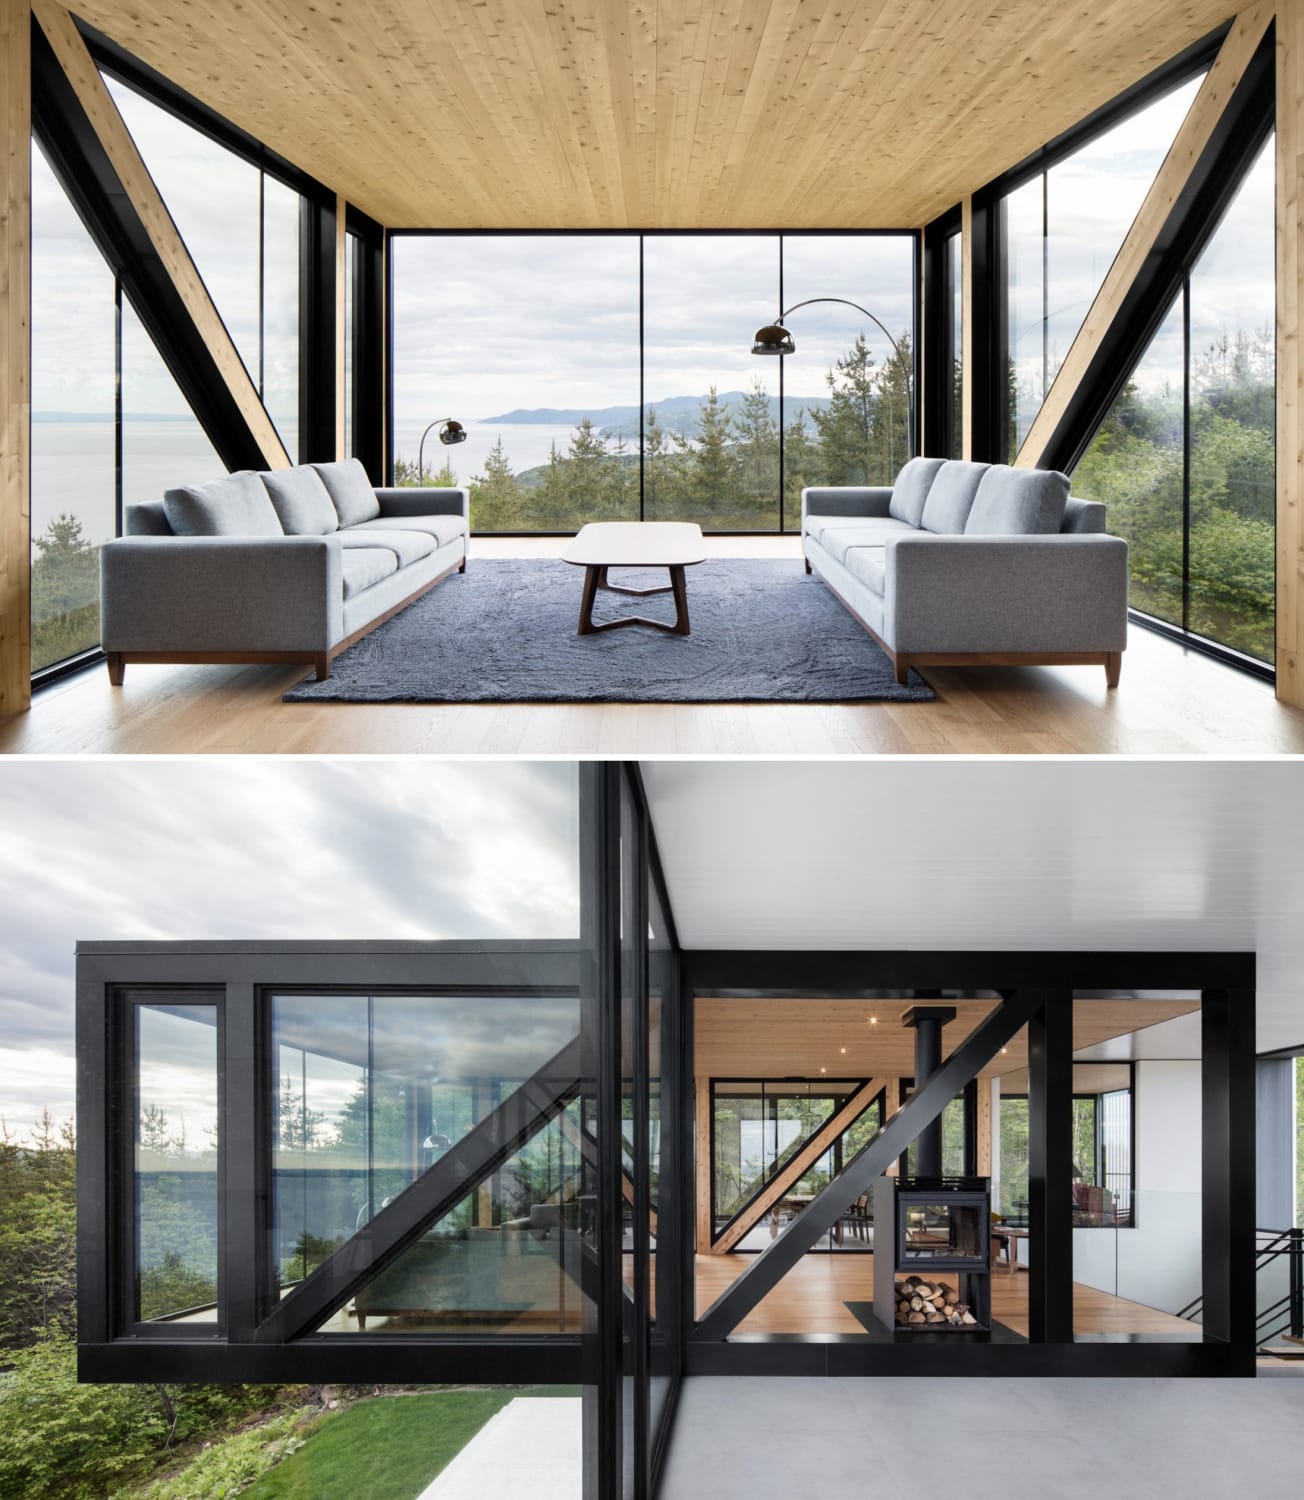 Cantilevered living space in a chalet with panoramic views of Saint Lawrence River, La Malbaie, Canada by ACDF Architecture